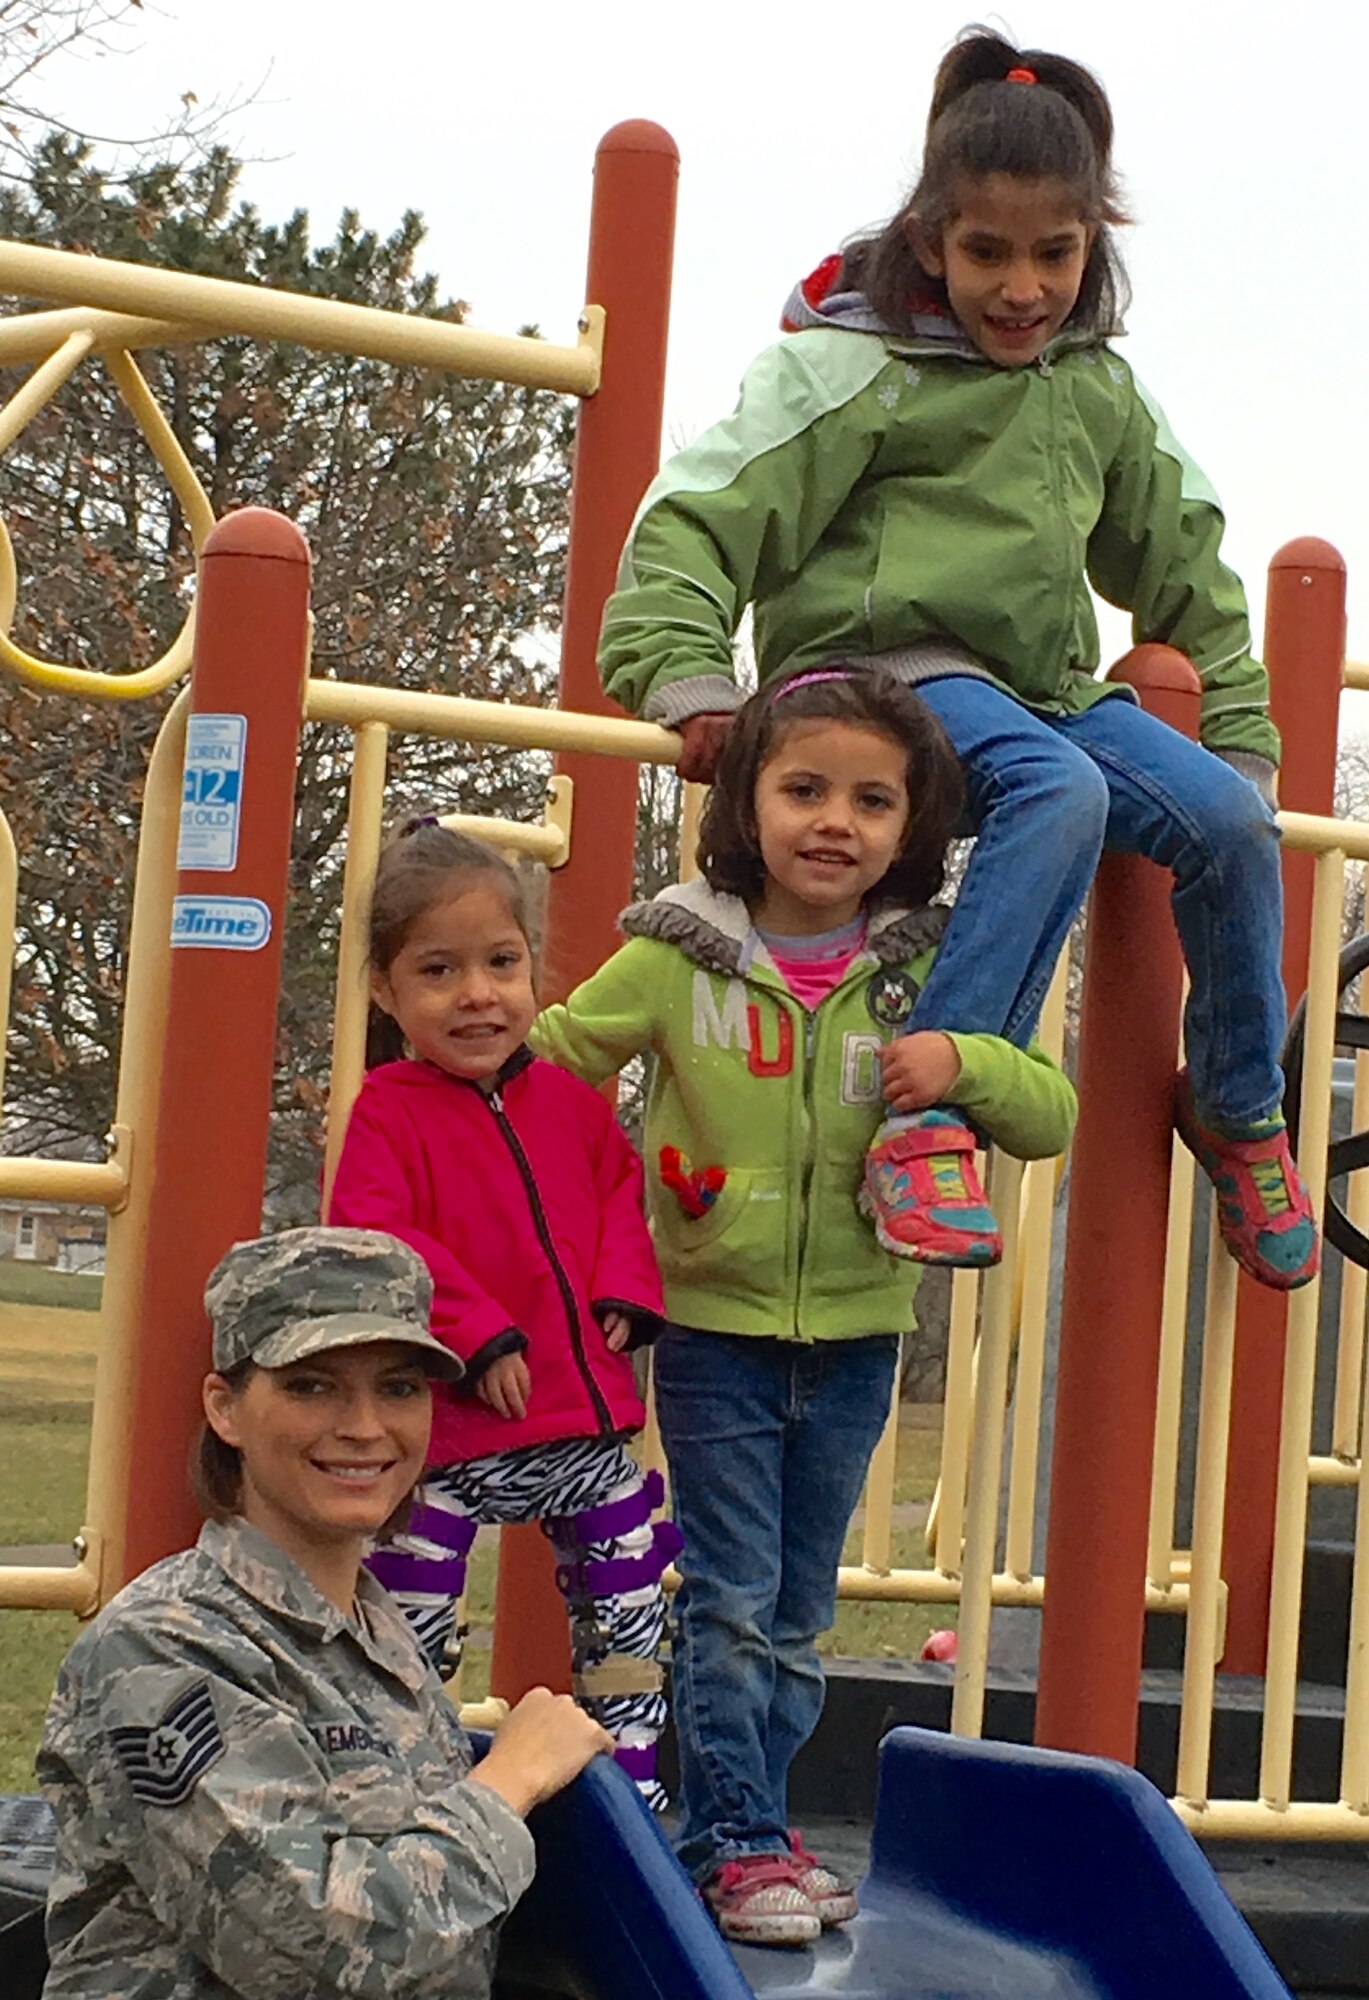 Tech. Sgt. Amanda Golembiewski with her three daughters, Grace, Allie, and Emma enjoy a day at the playground. (Contributed photo)